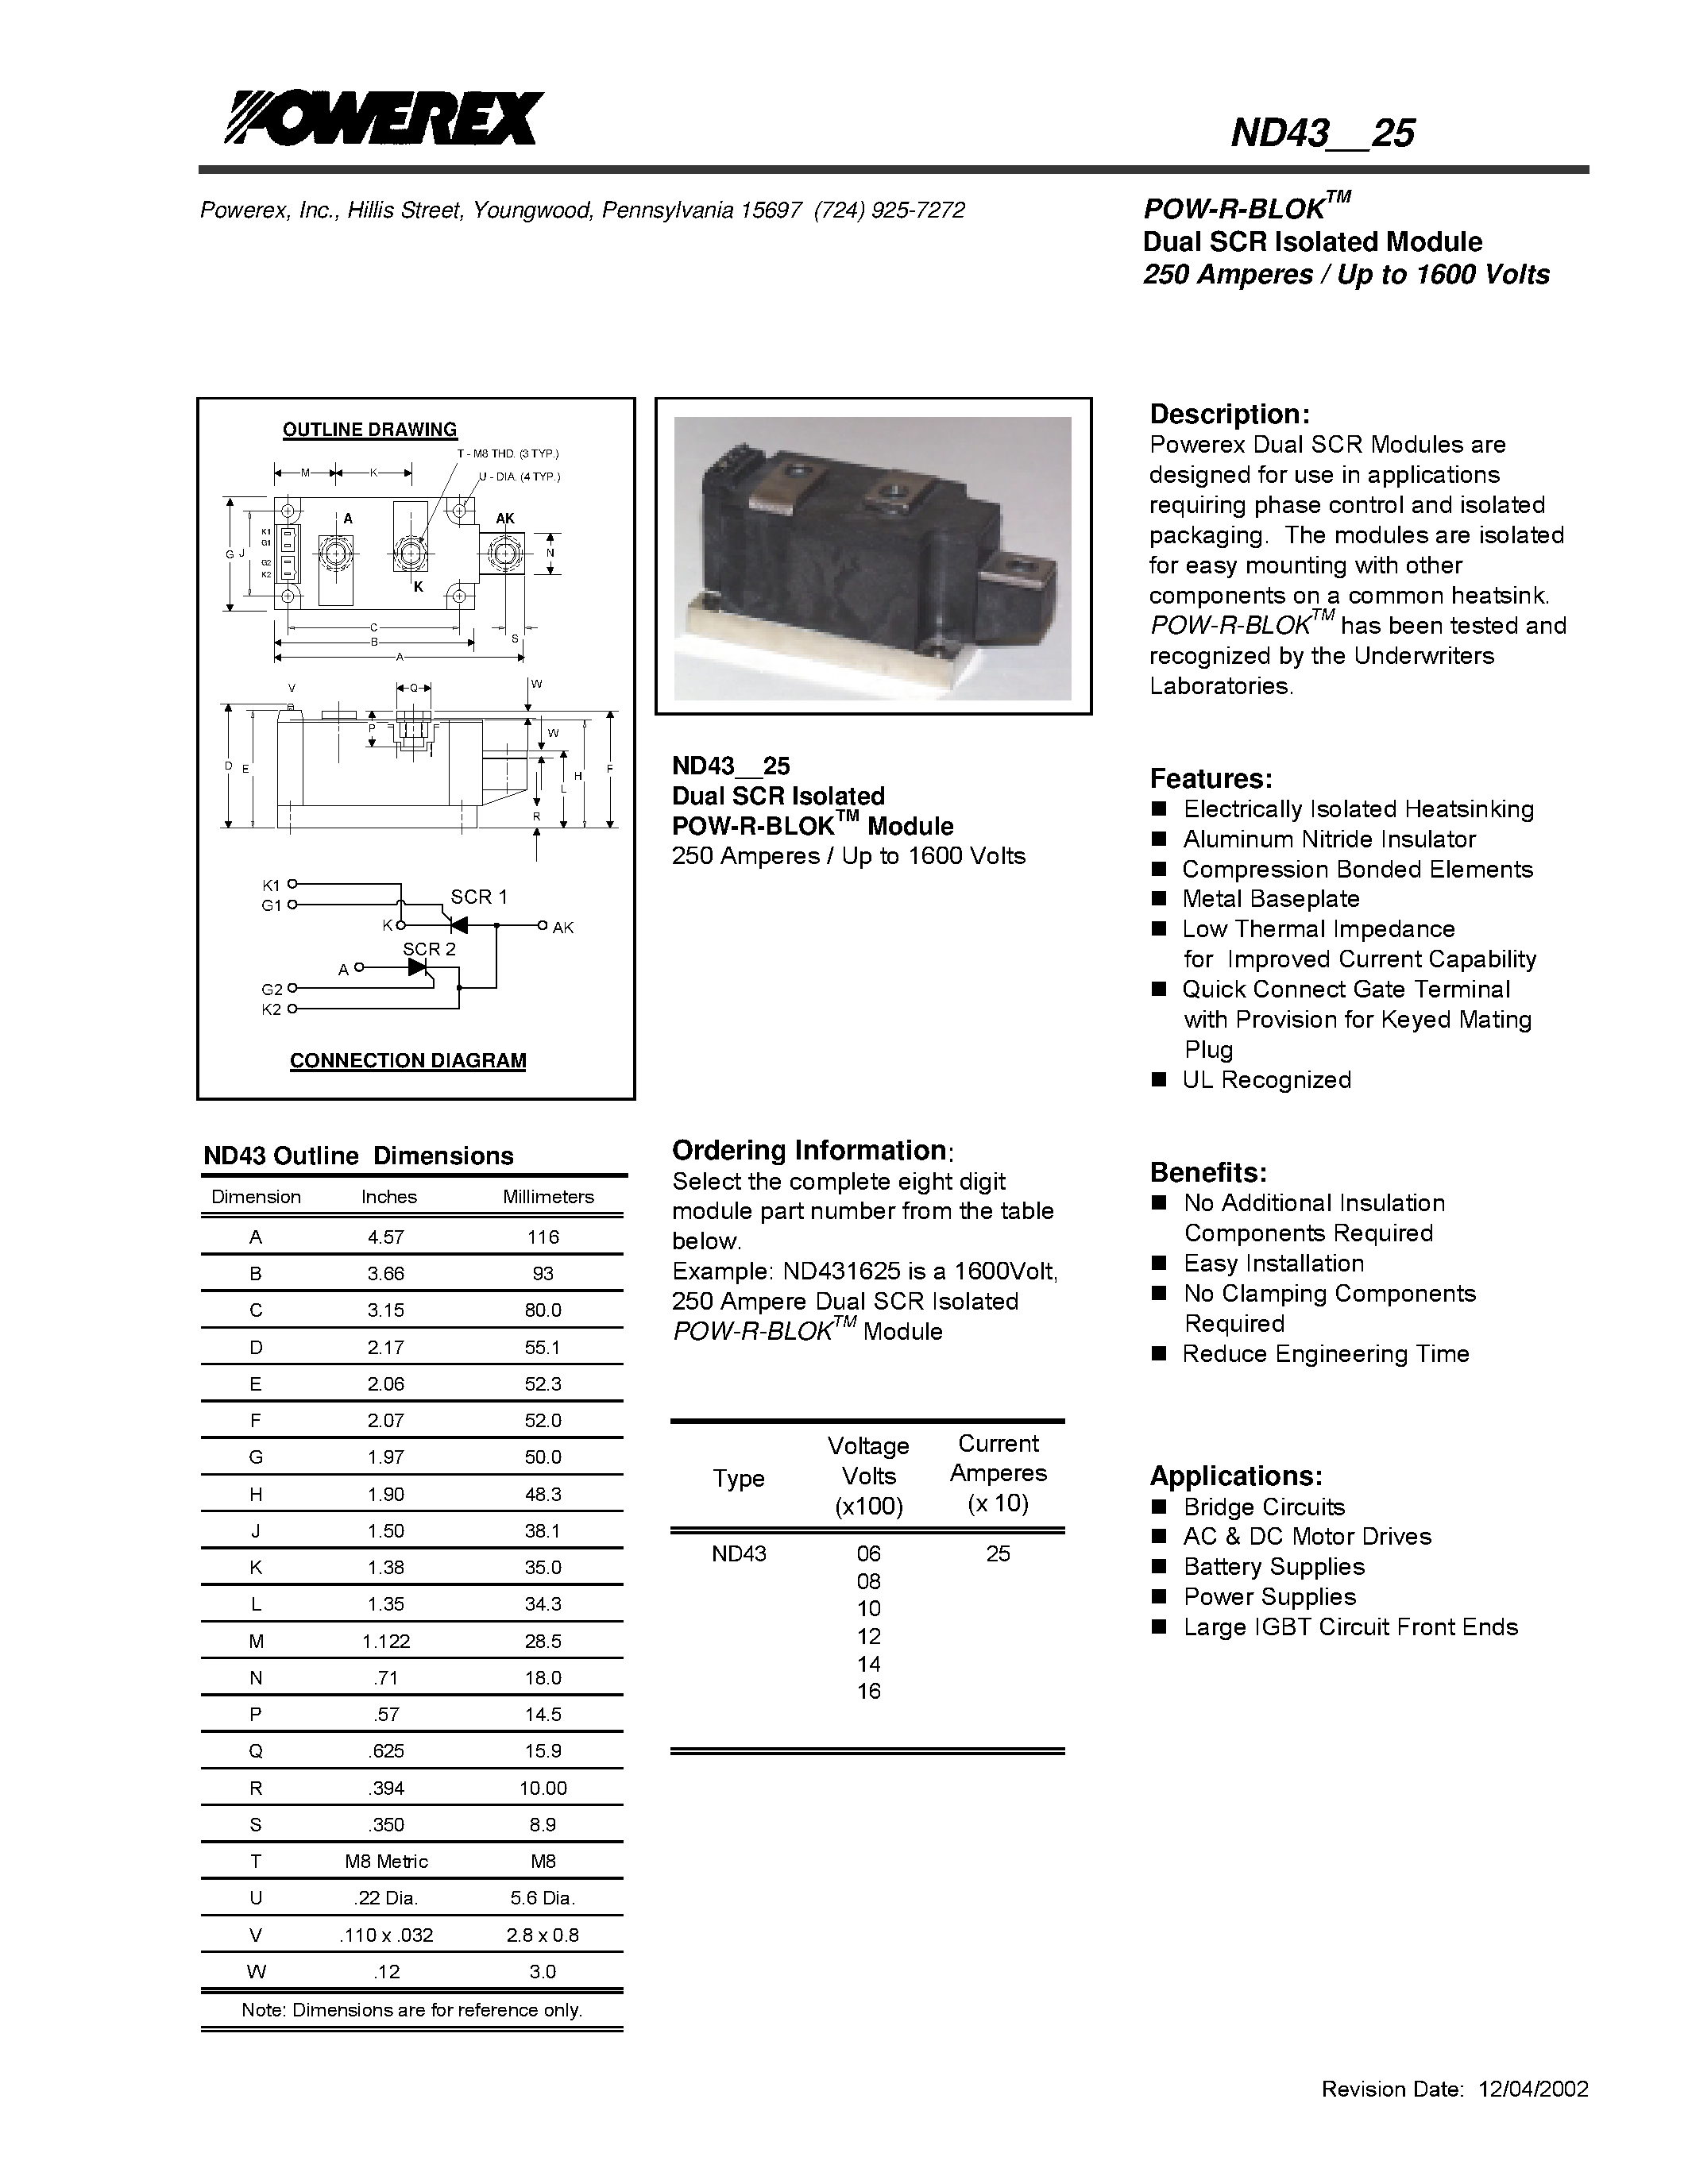 Datasheet ND430825 - POW-R-BLOK Dual SCR Isolated Module (250 Amperes / Up to 1600 Volts) page 1